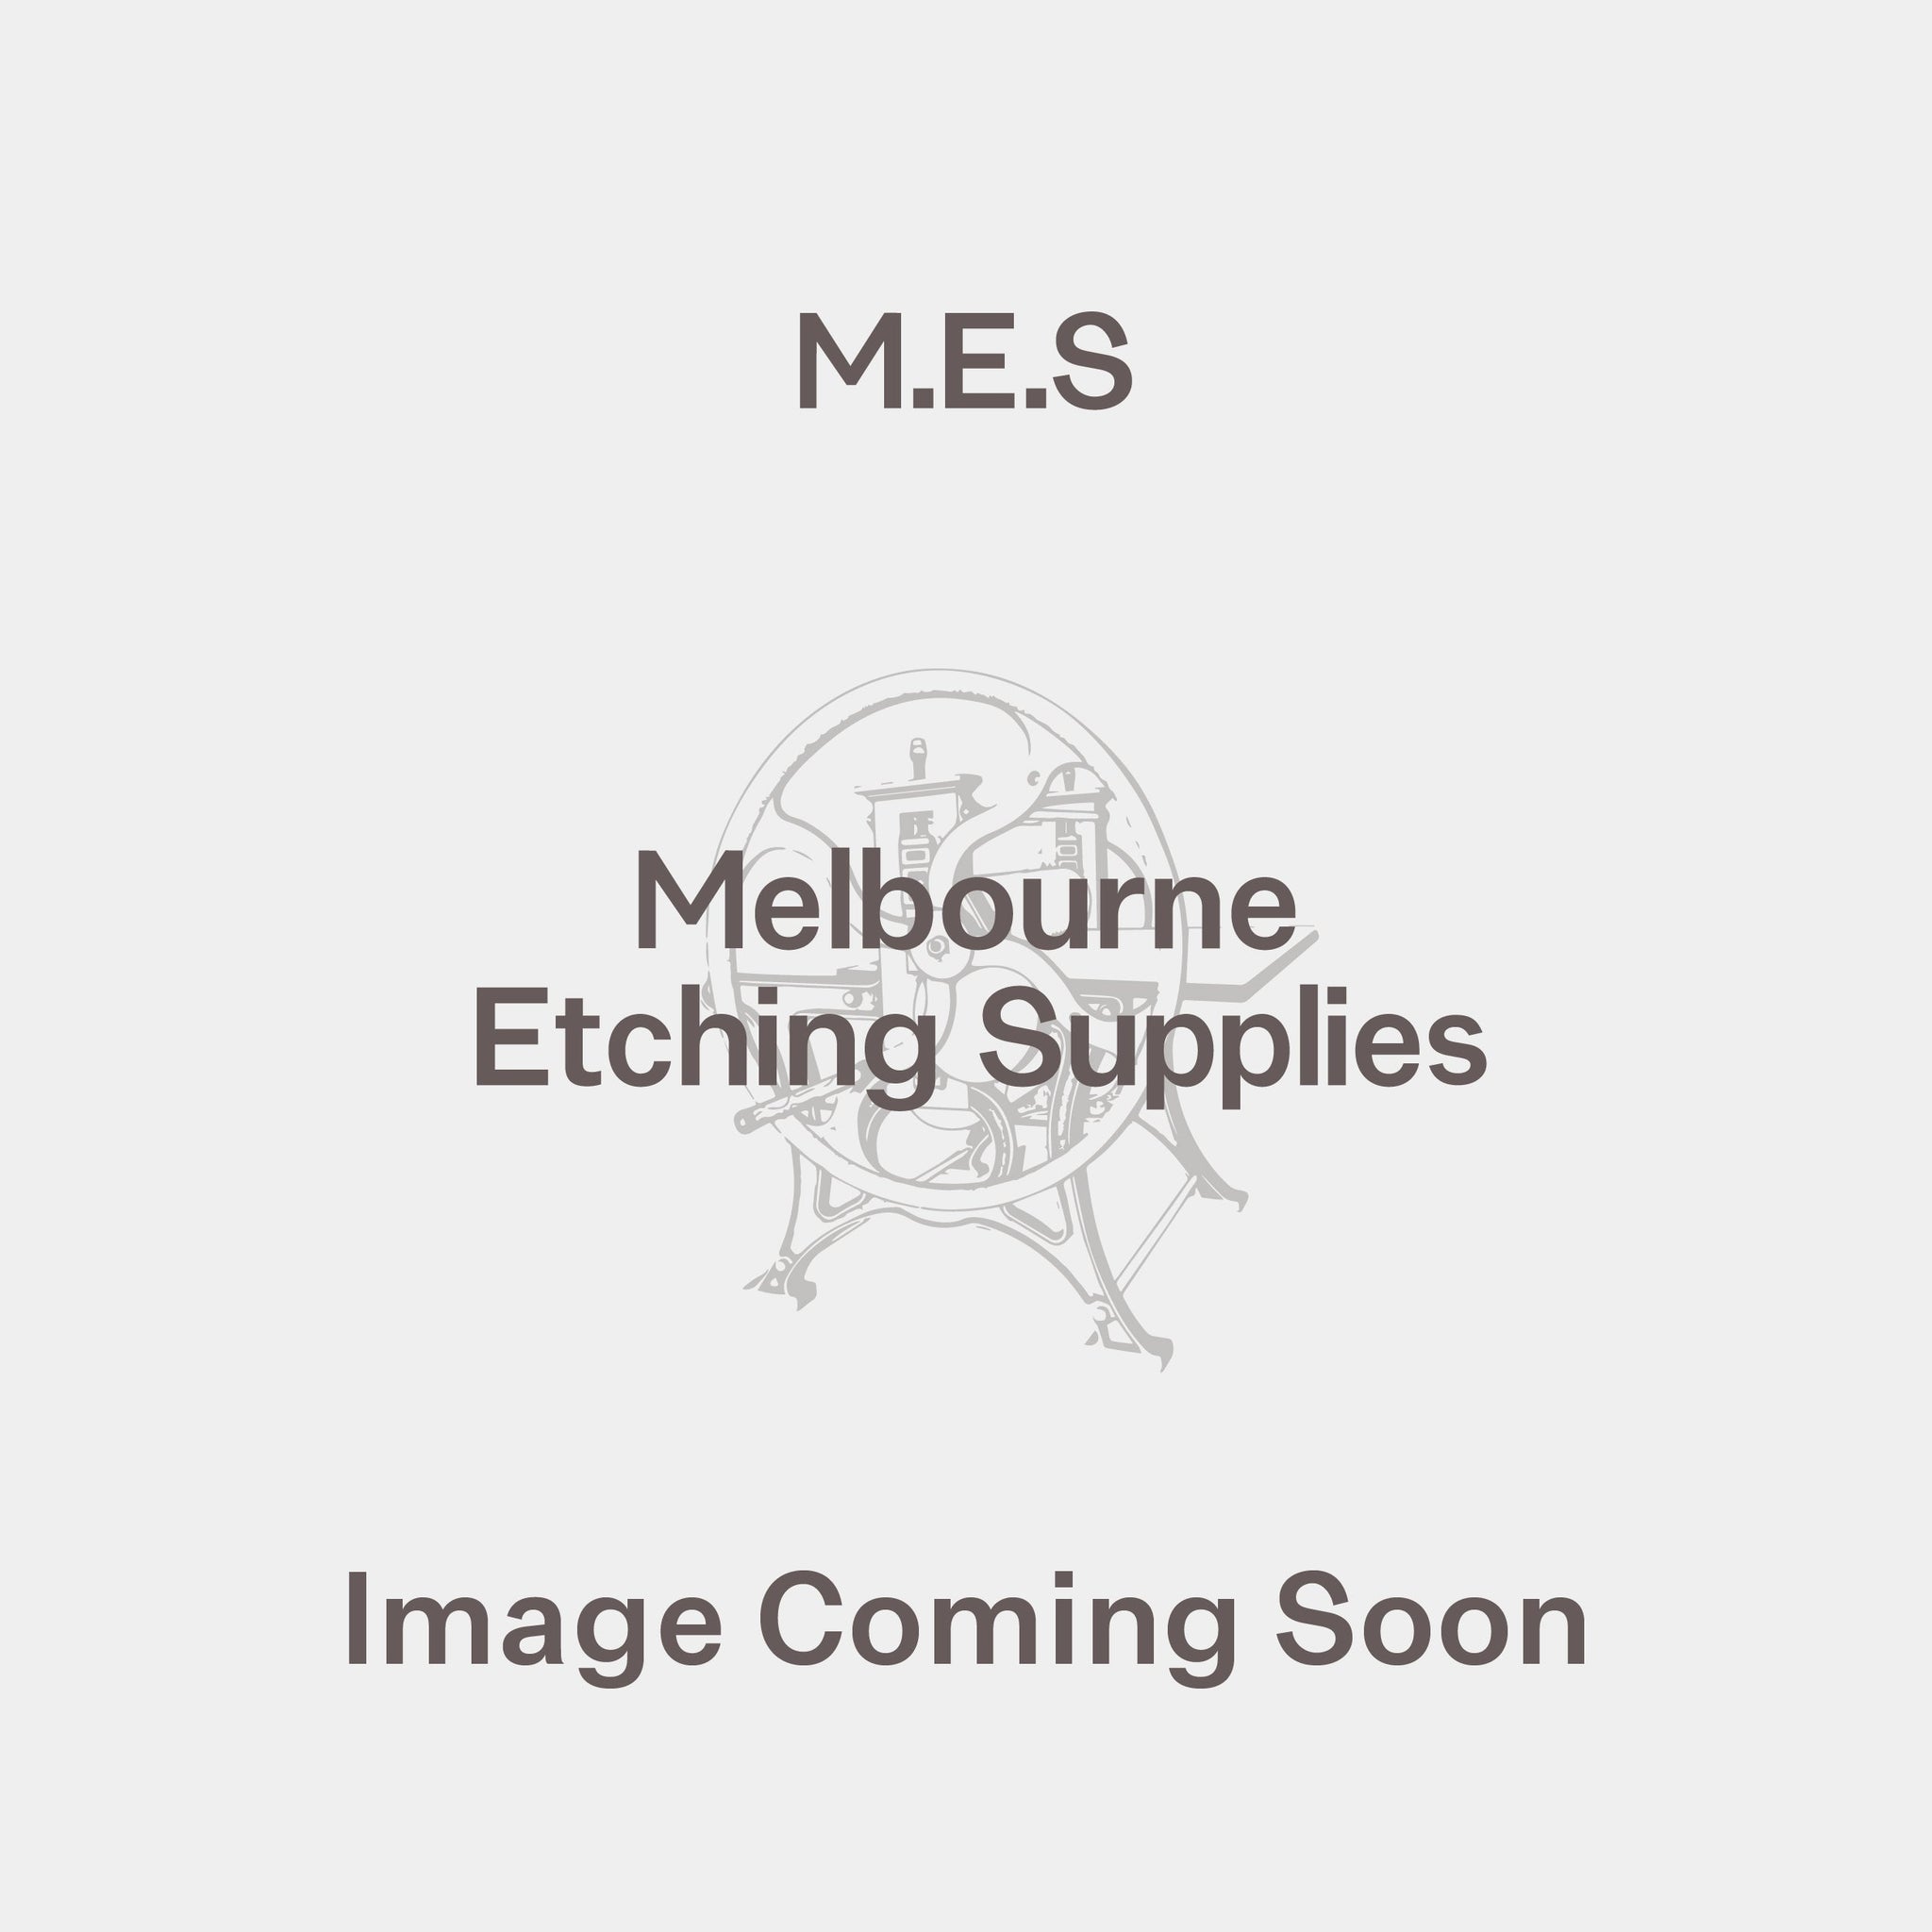 Kent Edition A1 Drawing Paper - Melbourne Etching Supplies